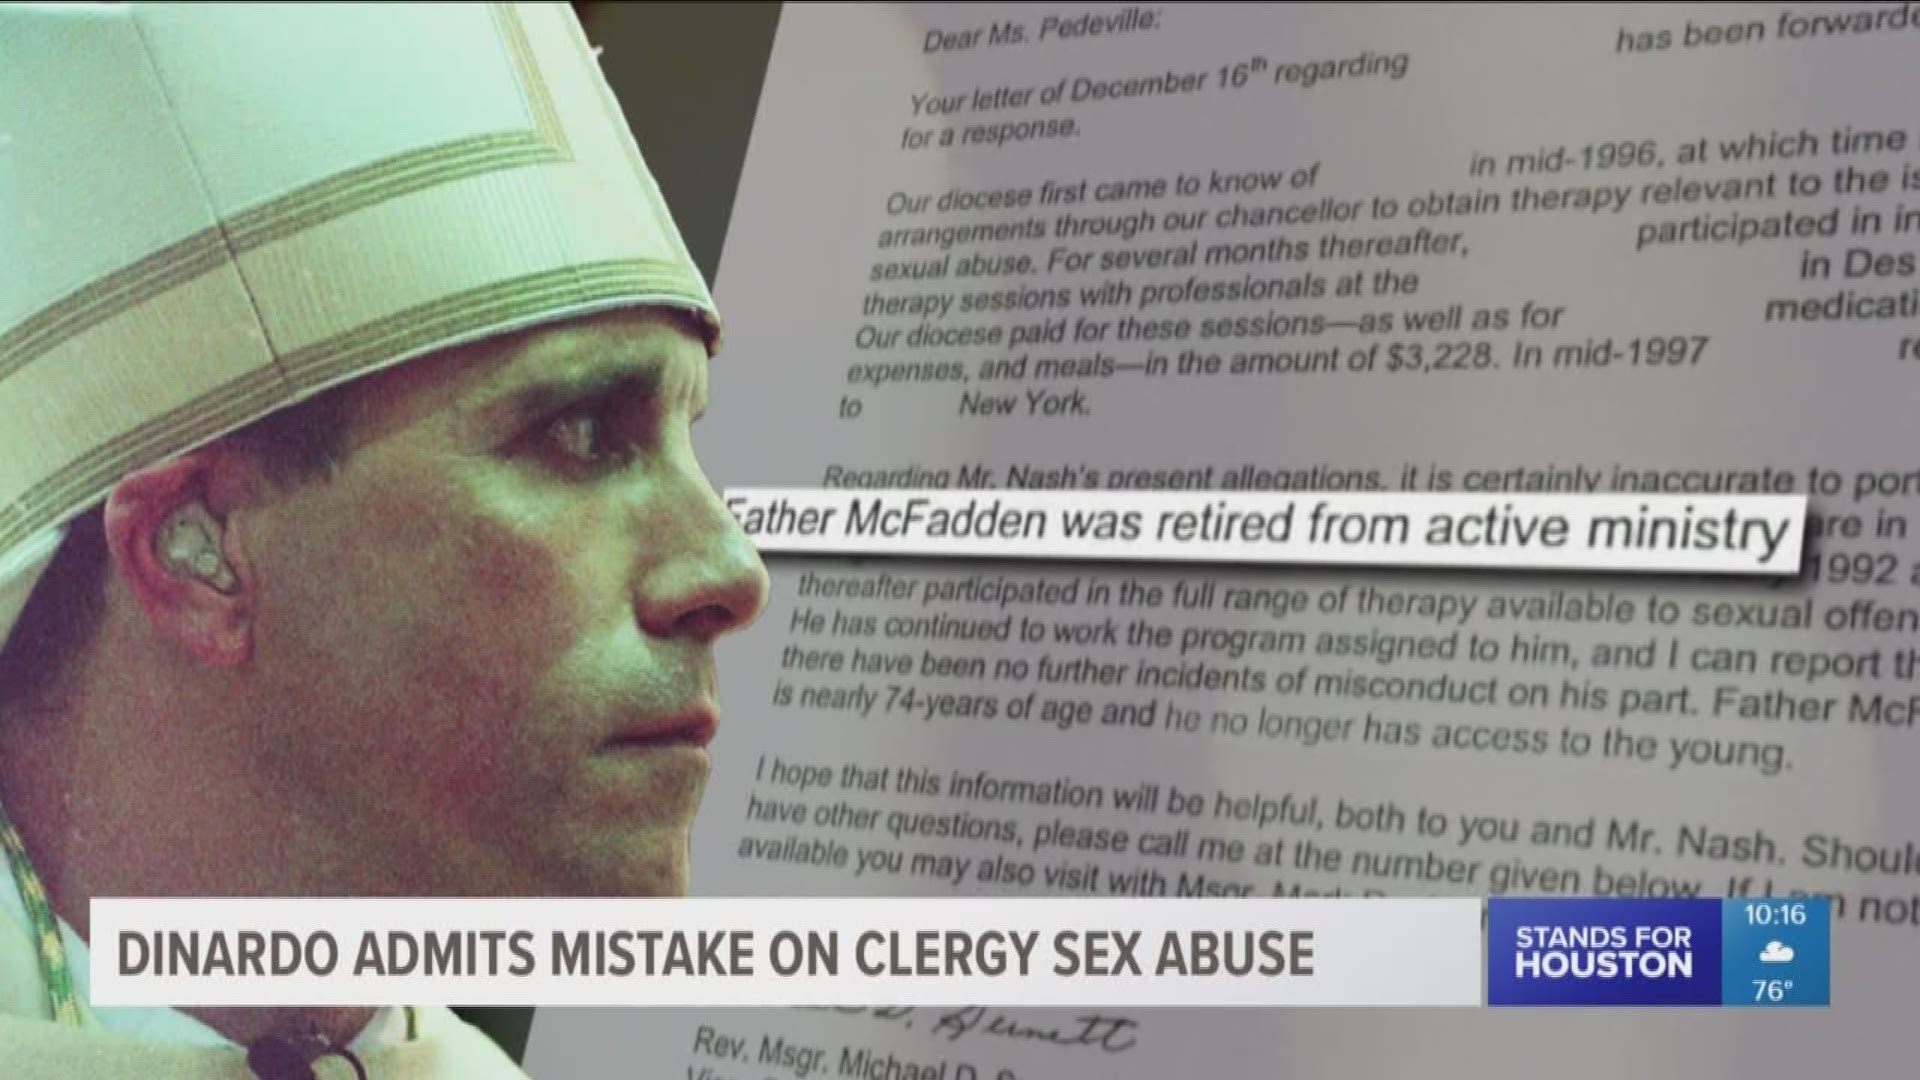 The leading voice in the clergy sex abuse crisis, Cardinal Daniel DiNardo admitted to mishandling the case of a pedophile priest, KHOU 11 Investigates found.